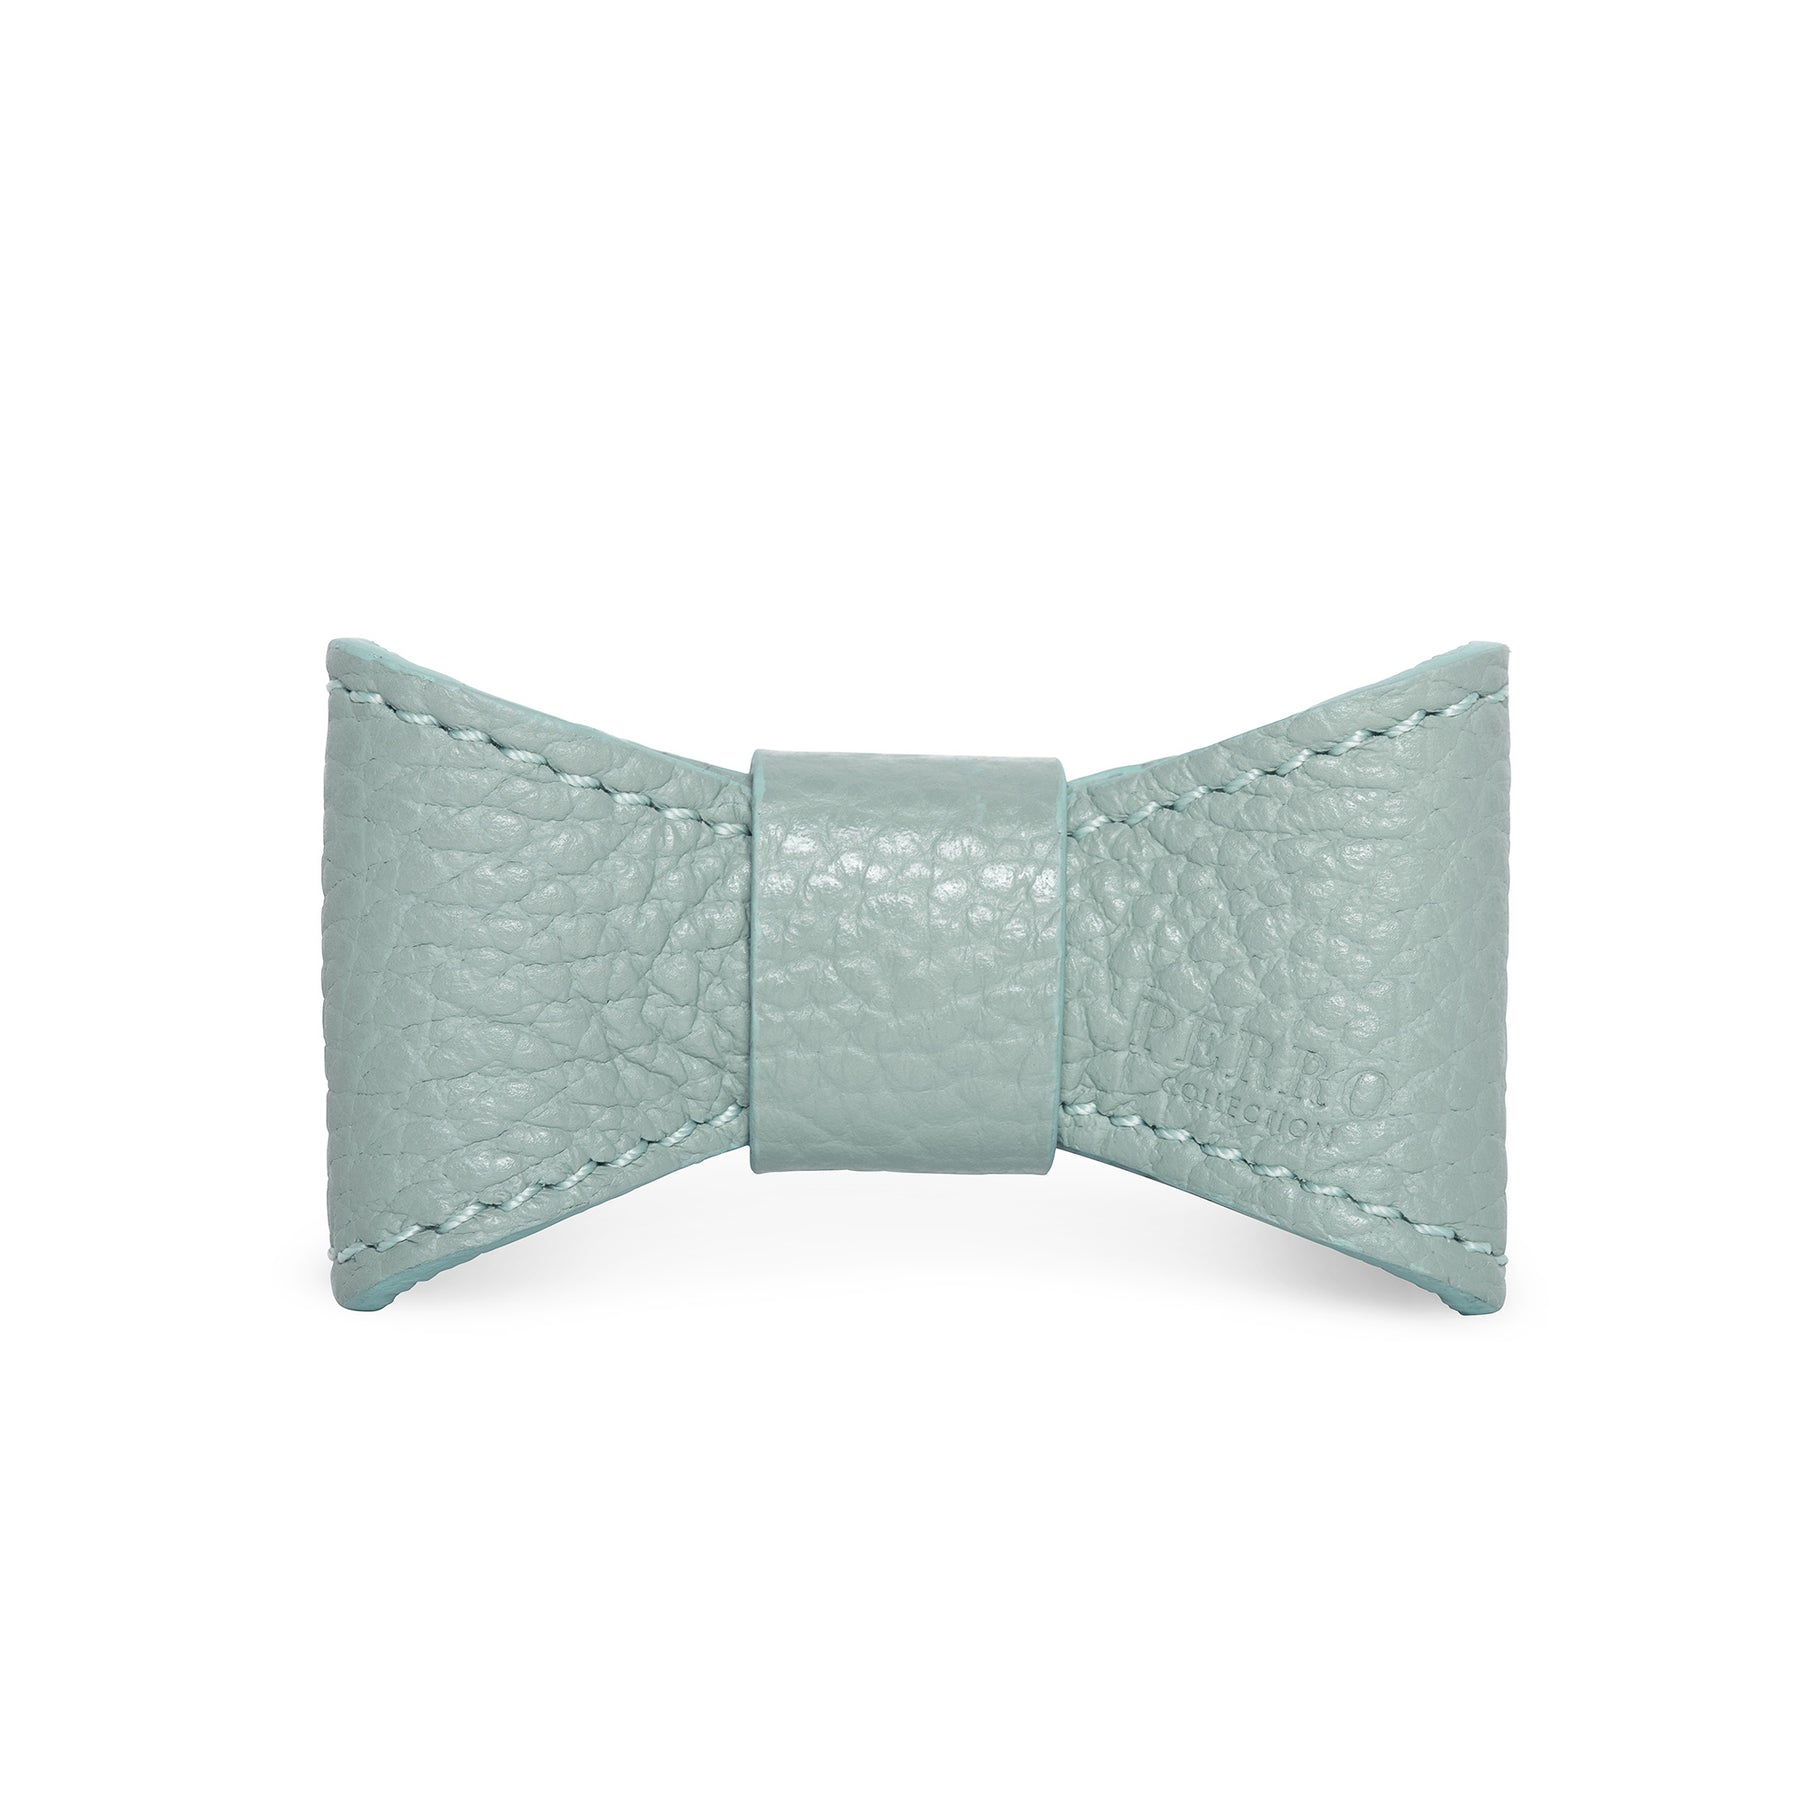 MINT LEATHER BOW